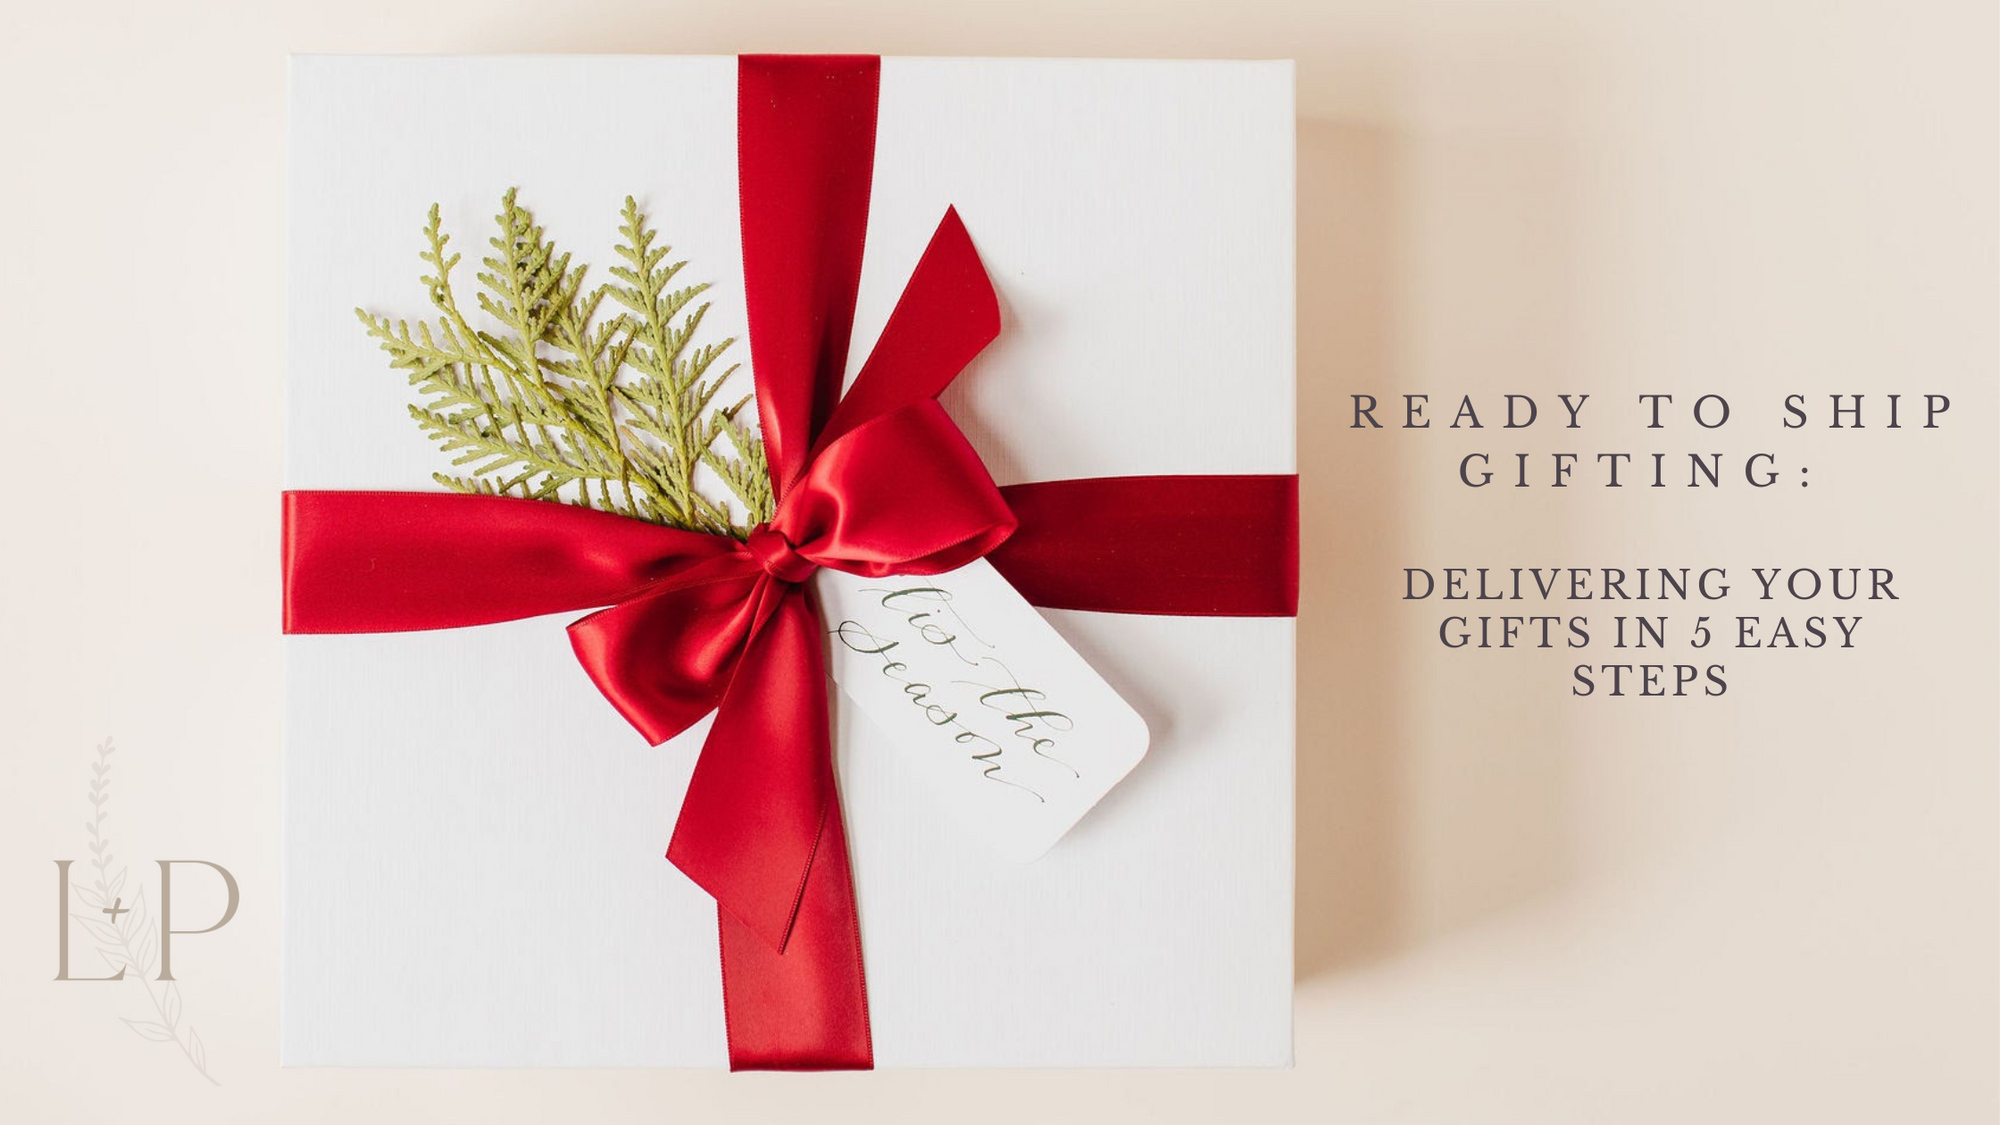 Ready To Ship Gifting: Delivering Your Gifts in 5 Easy Steps!